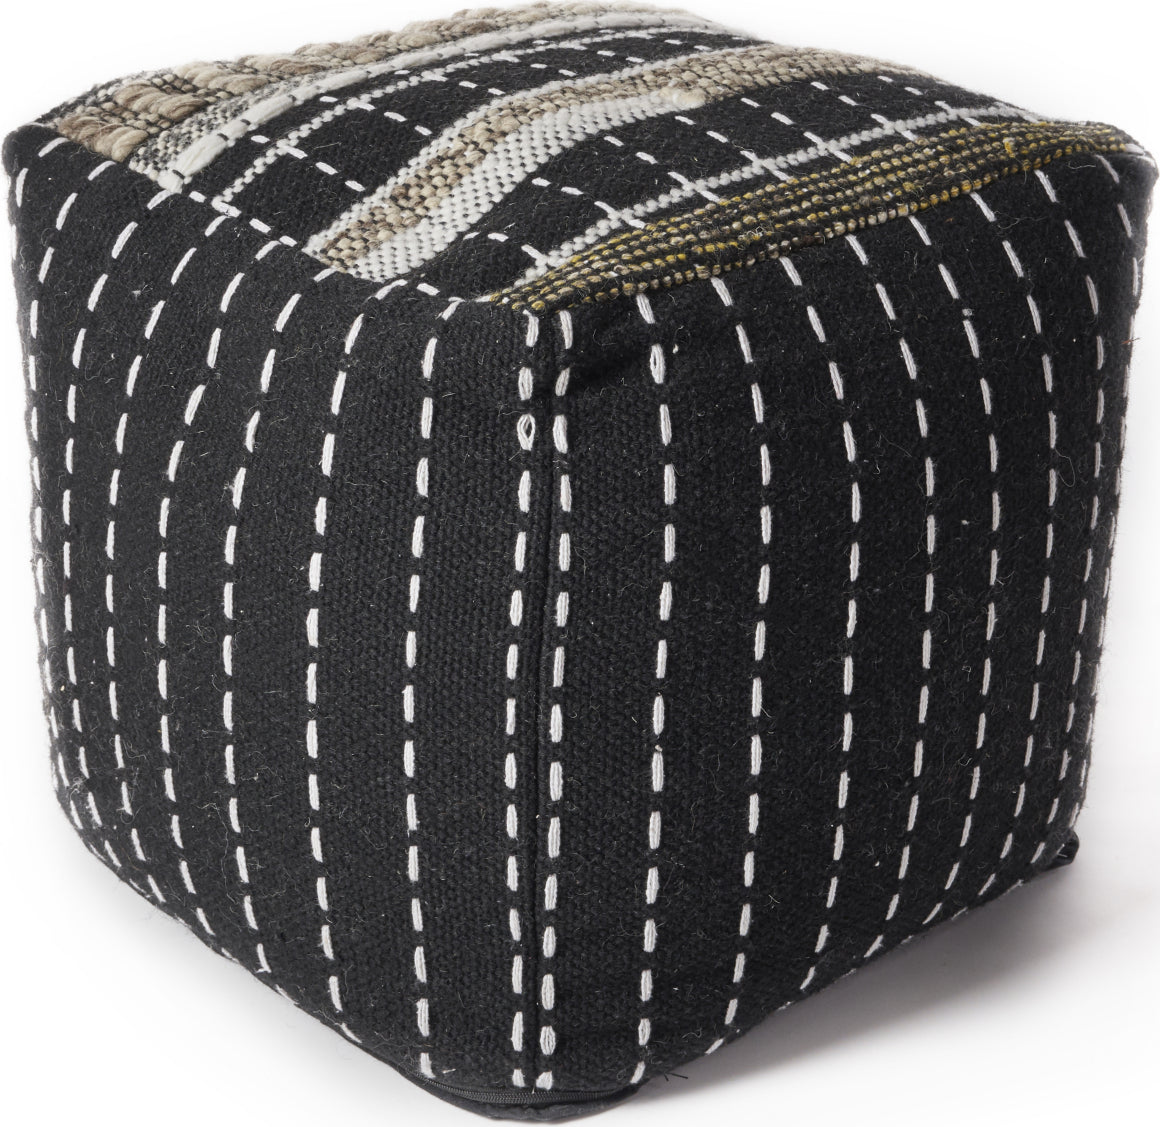 KAS Pouf F860 Black and White Pulse Mirror main image